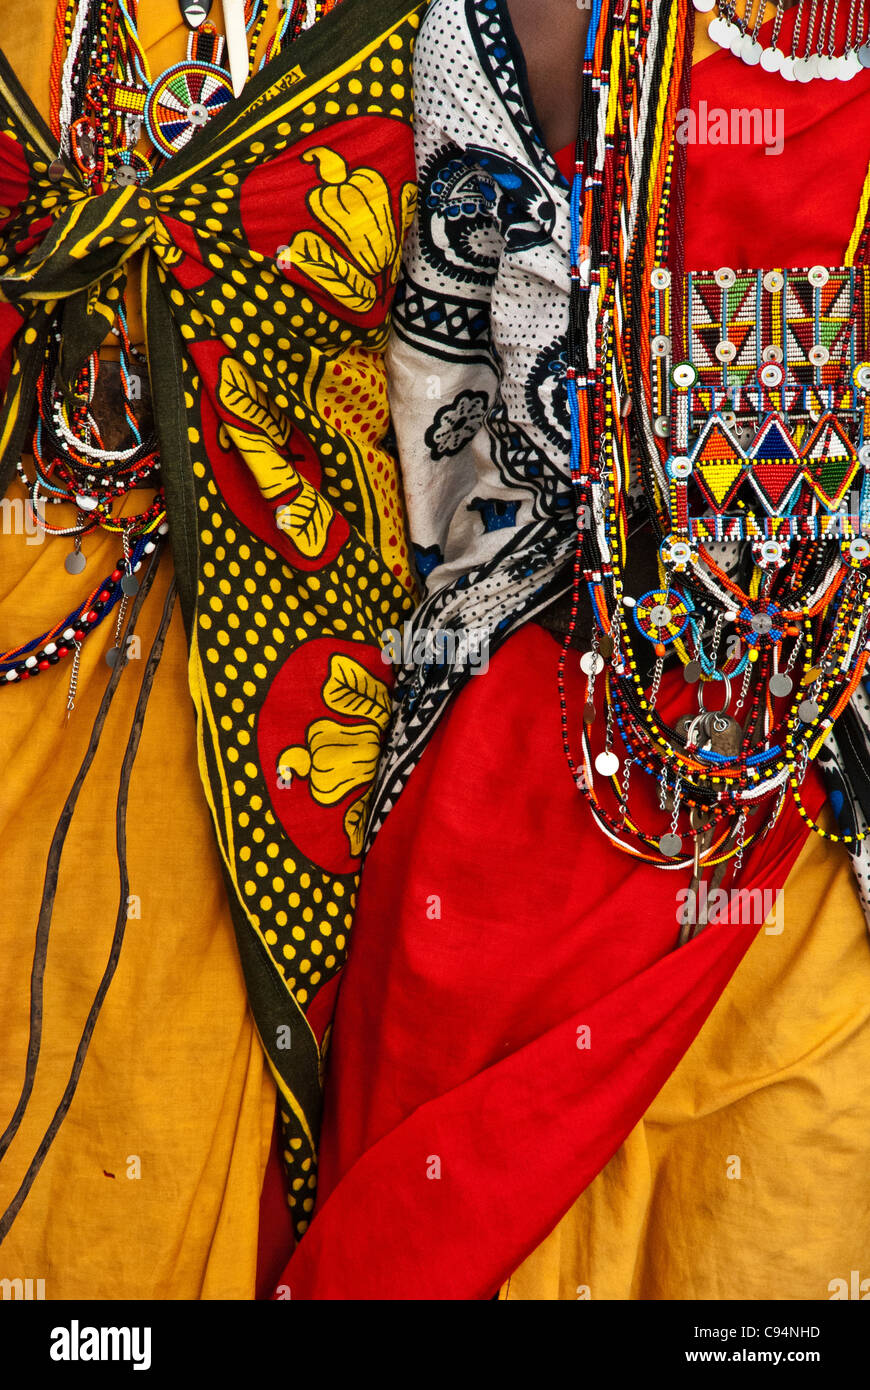 Close up of traditional Masai women's clothing and necklaces, Village in the Masai Mara, Kenya, Africa Stock Photo